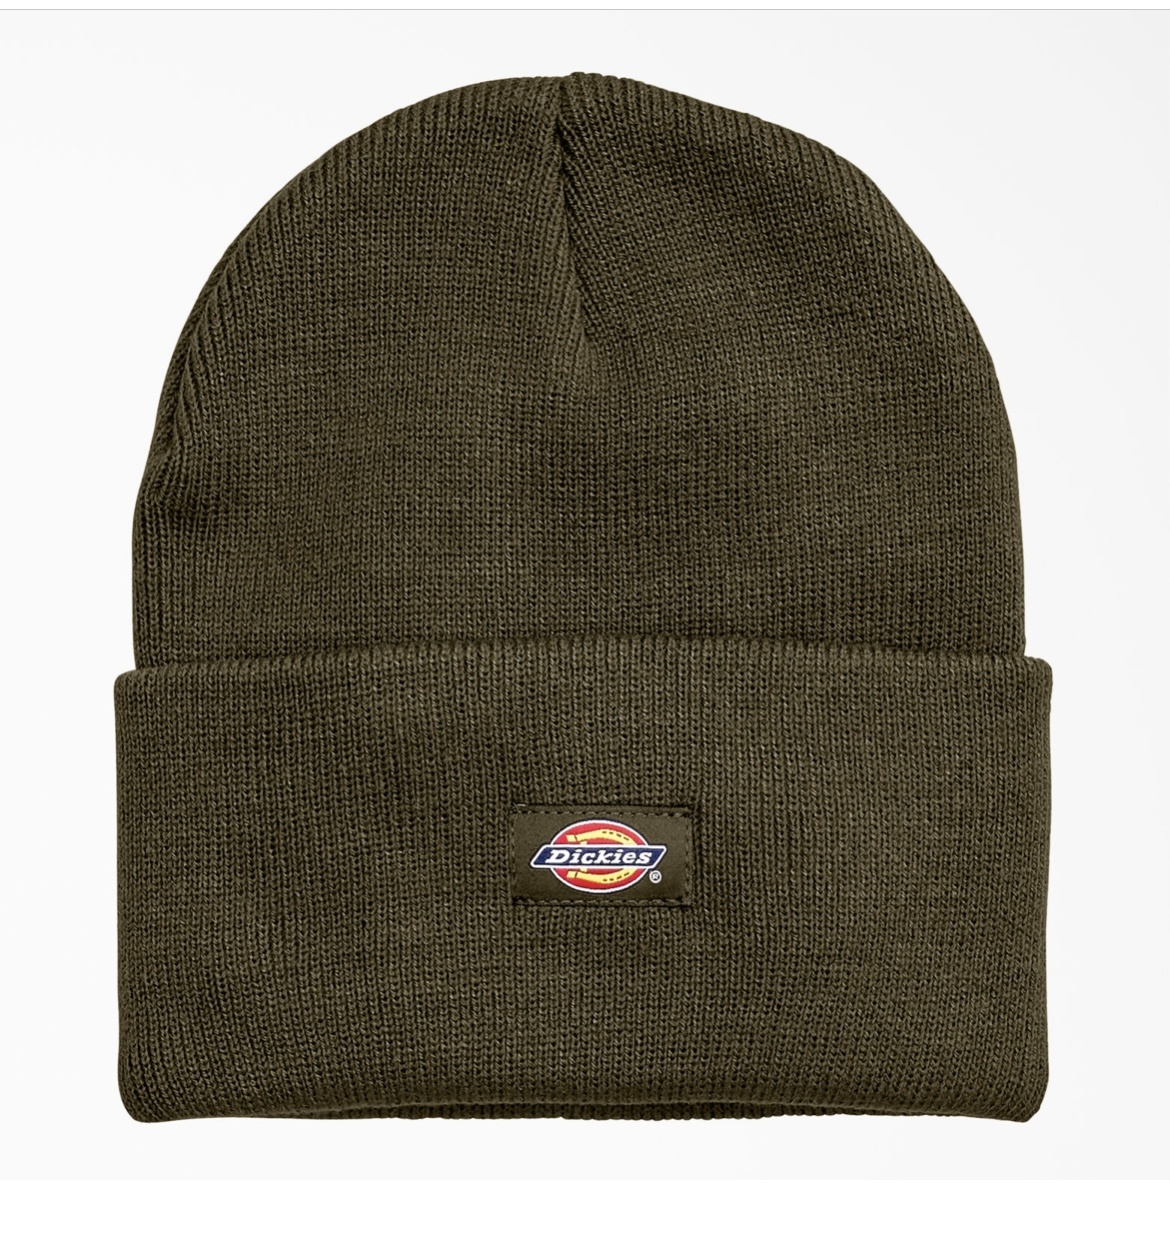 DICKIES CUFFED KNIT BEANIE DARK OLIVE GREEN - Laces